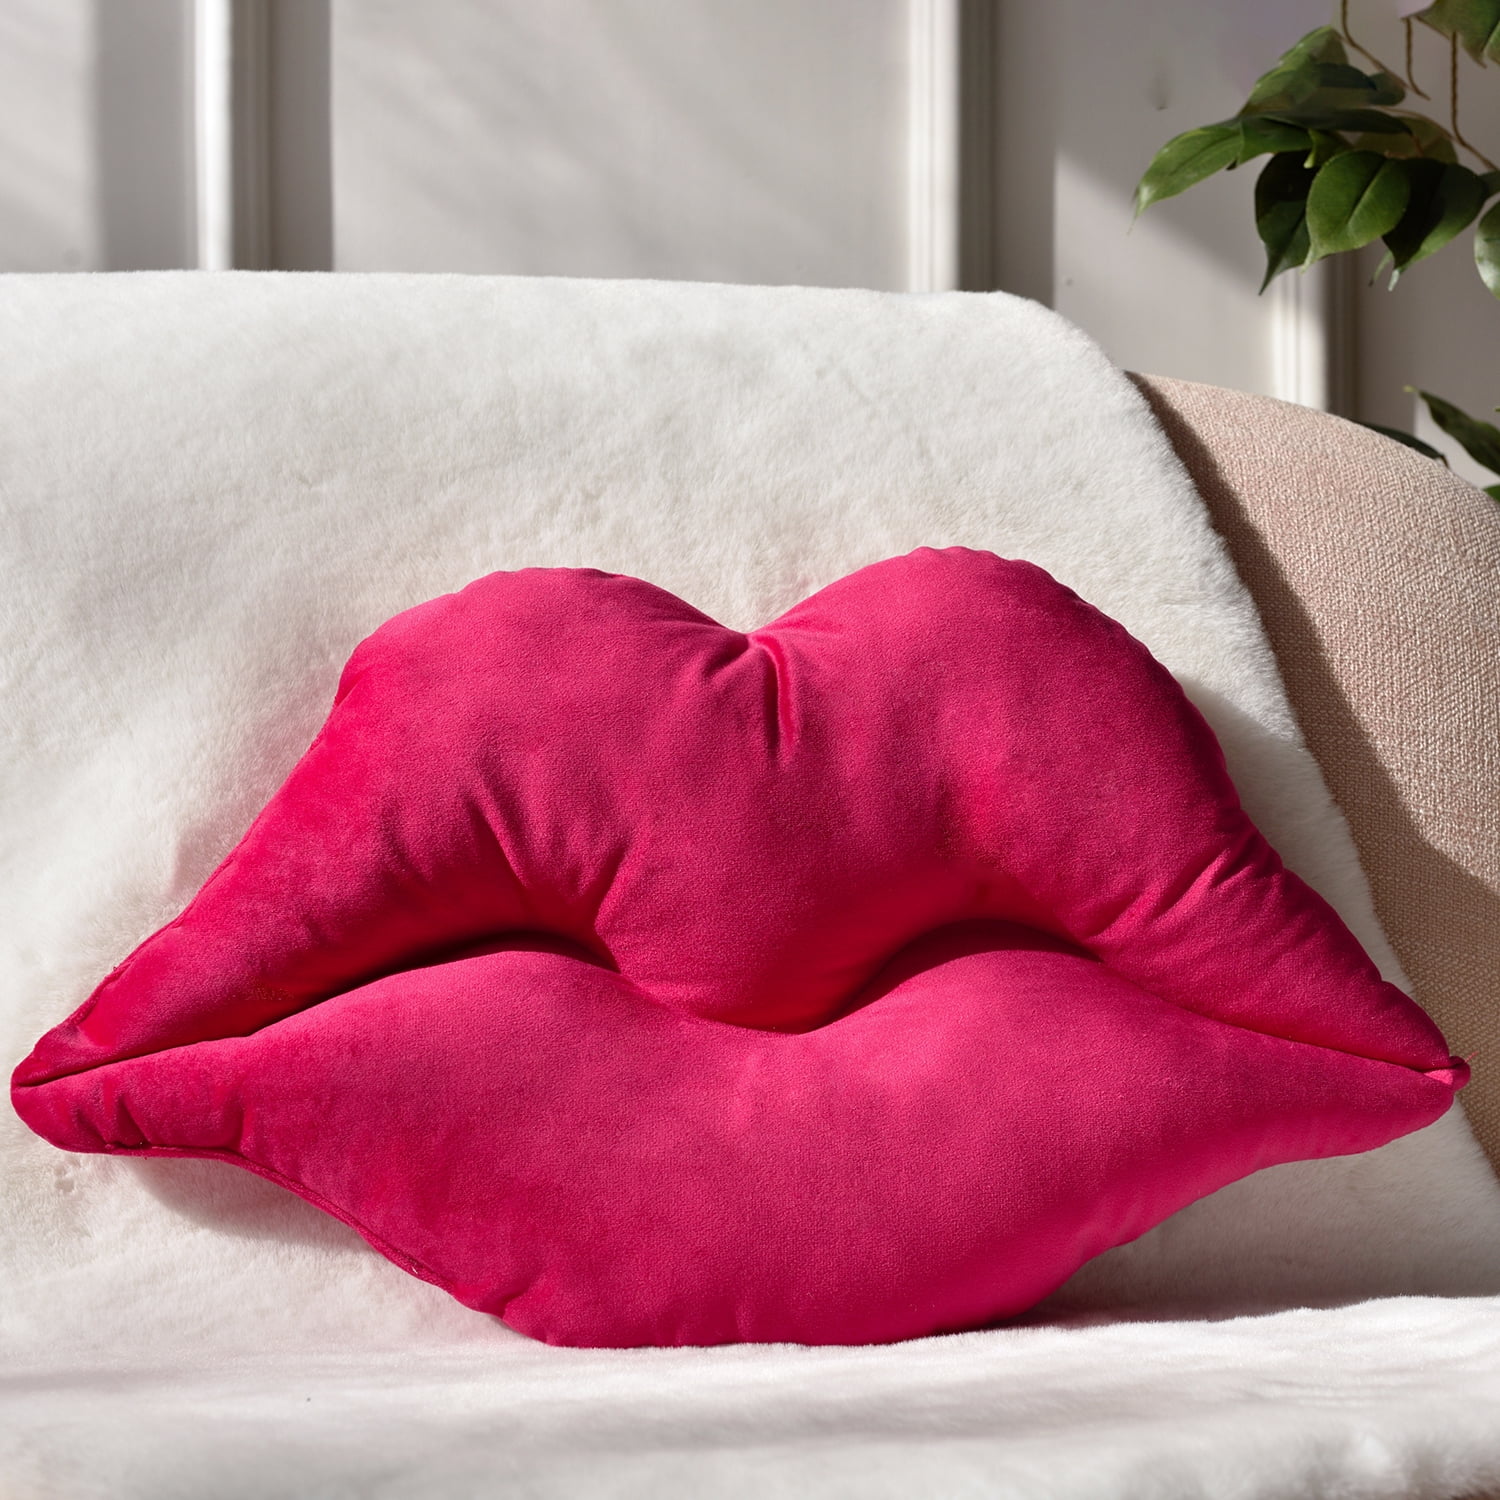 woody Gray Lips Glitter Pillow Home Decor Lips Throw Pillow Decorative  Cushion Pillow Couch Bed Shap…See more woody Gray Lips Glitter Pillow Home